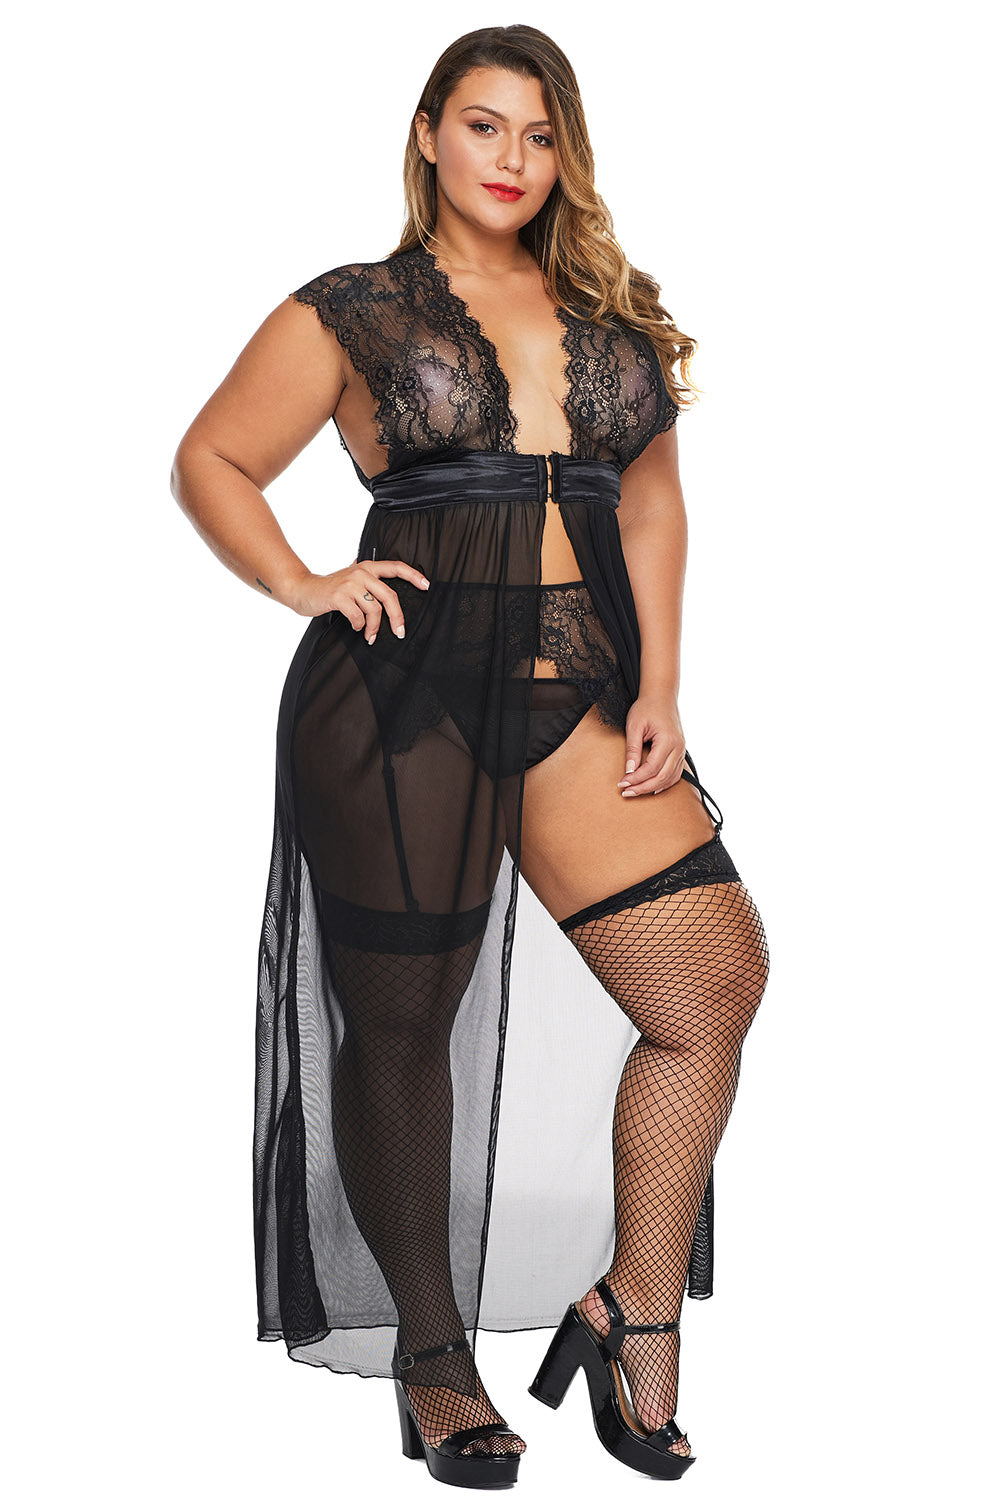 Hailey Locked Away Lover Lingerie Gown - The Bohemian Closet